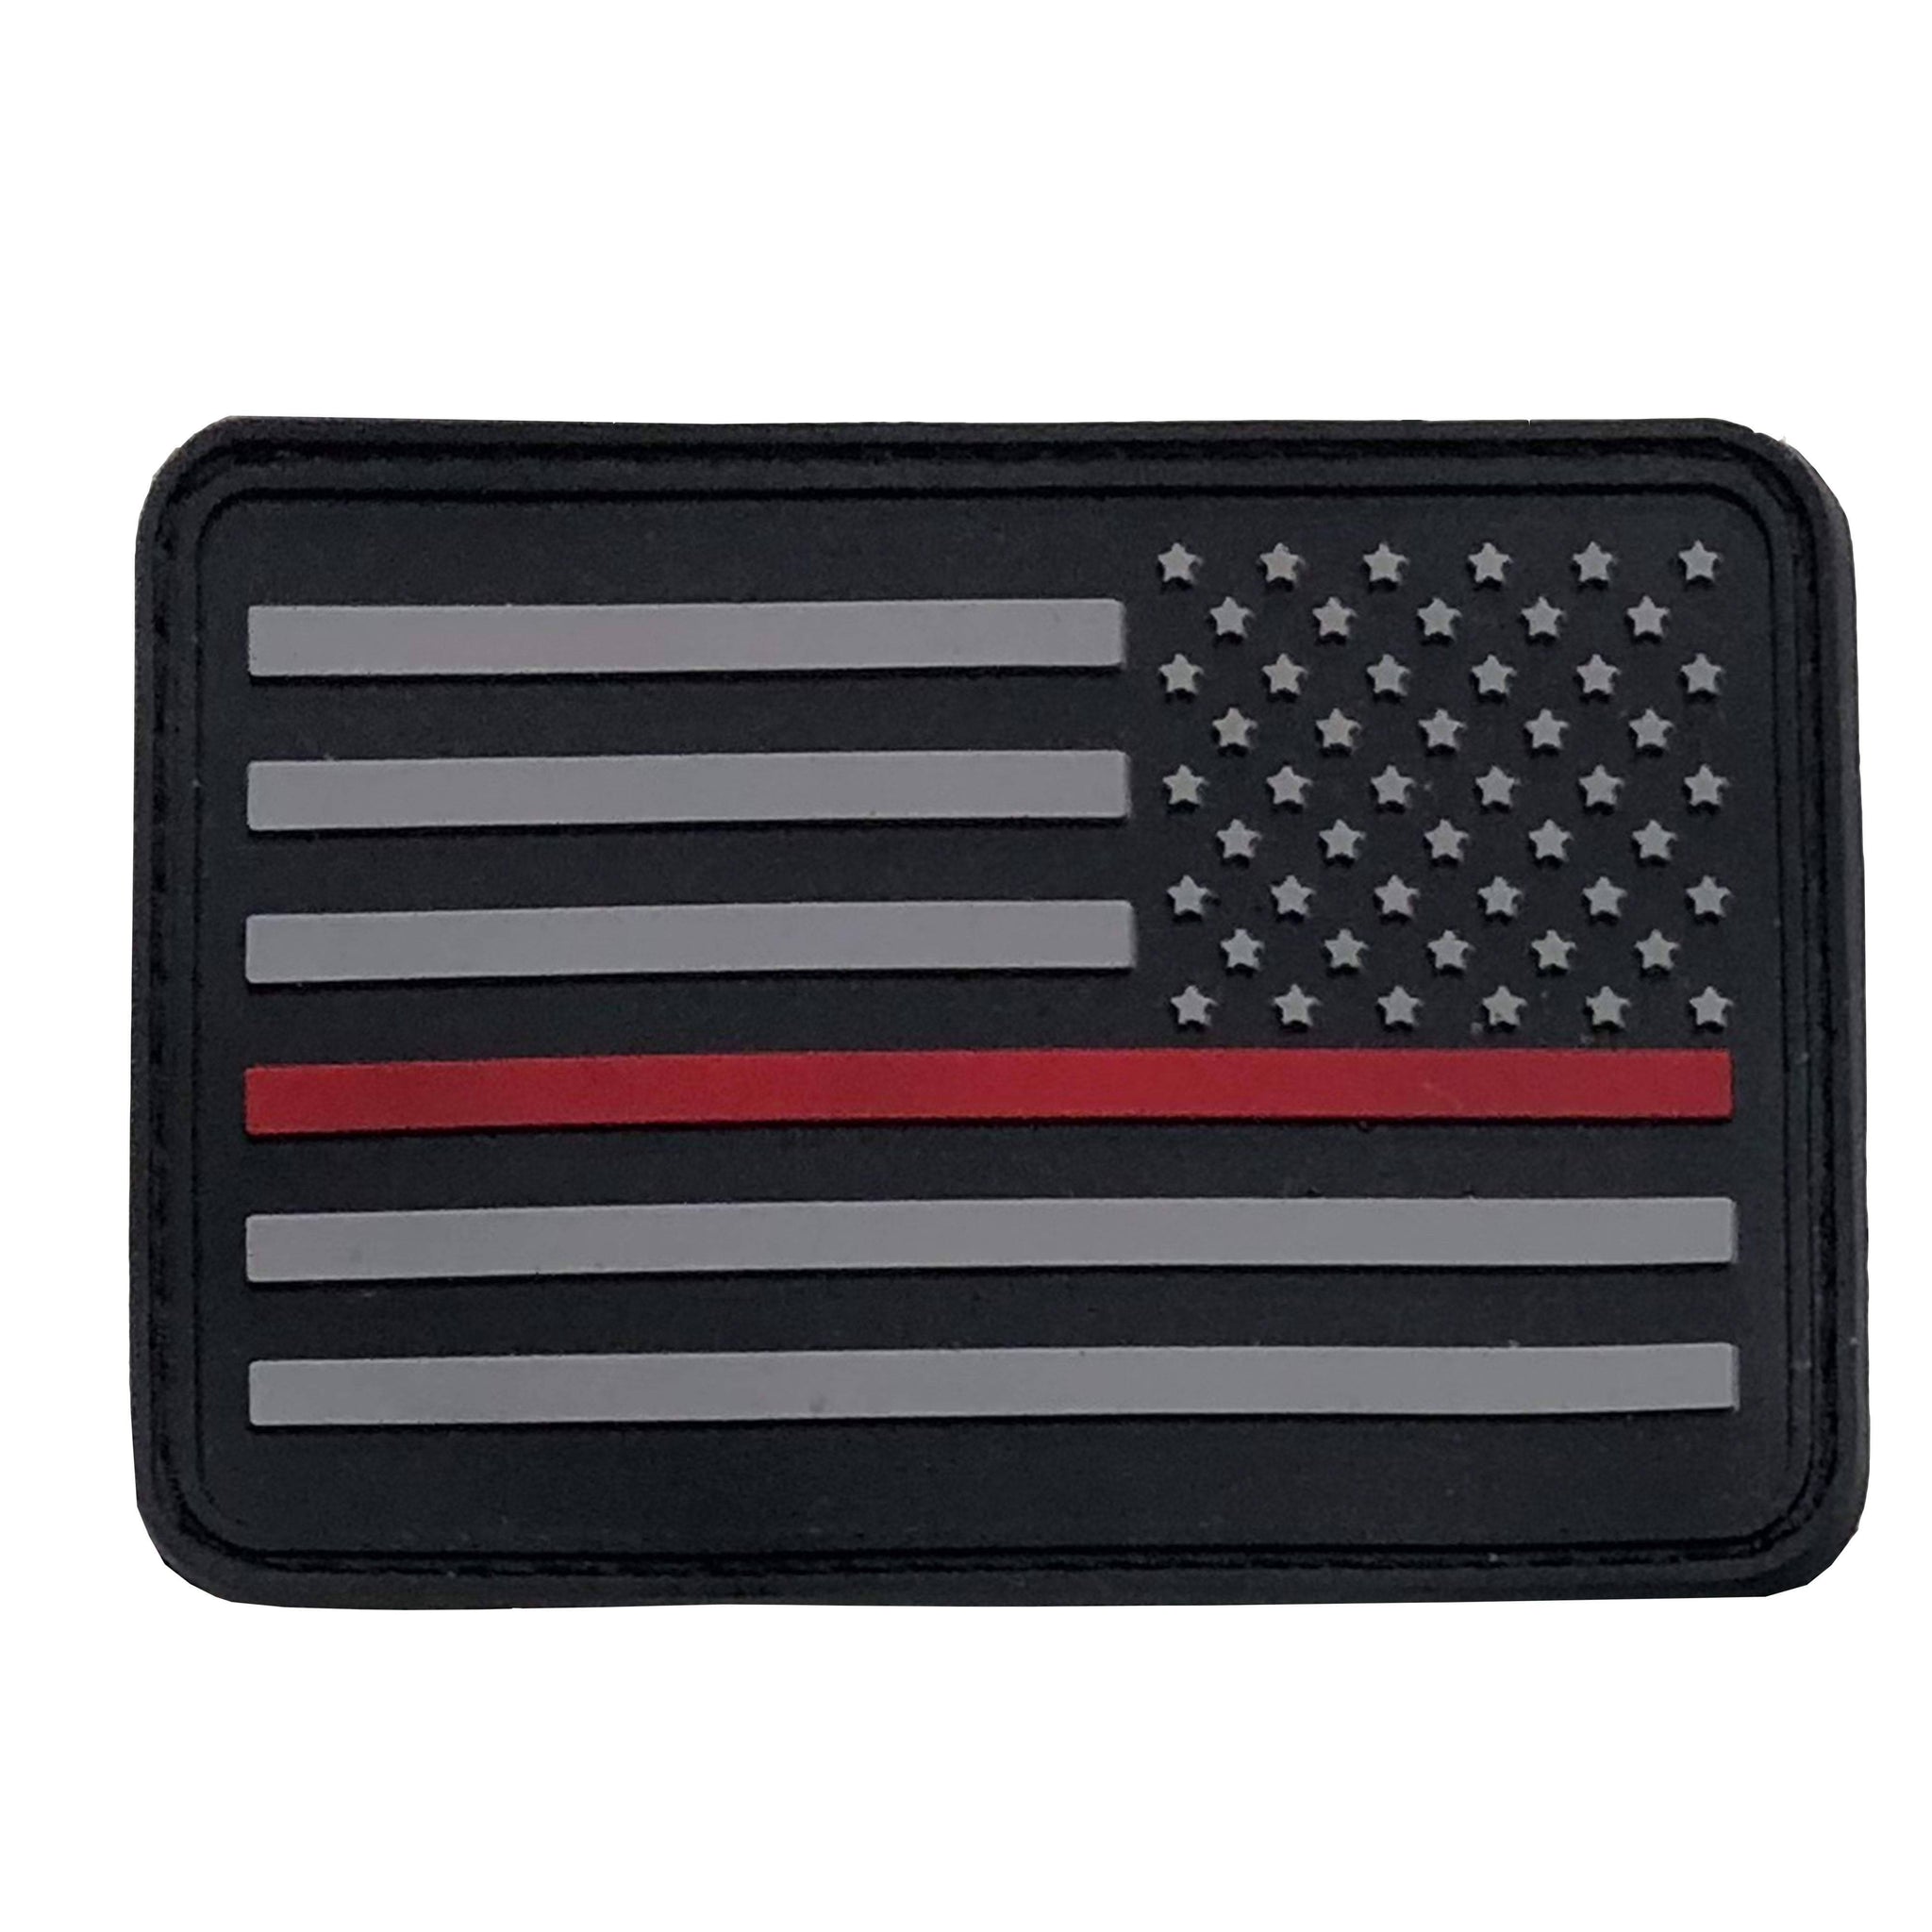 The Thin Red Line American Flag Patch, PVC Rubber, 2 x 3, Velcro Hook  backing - Choose Orientation